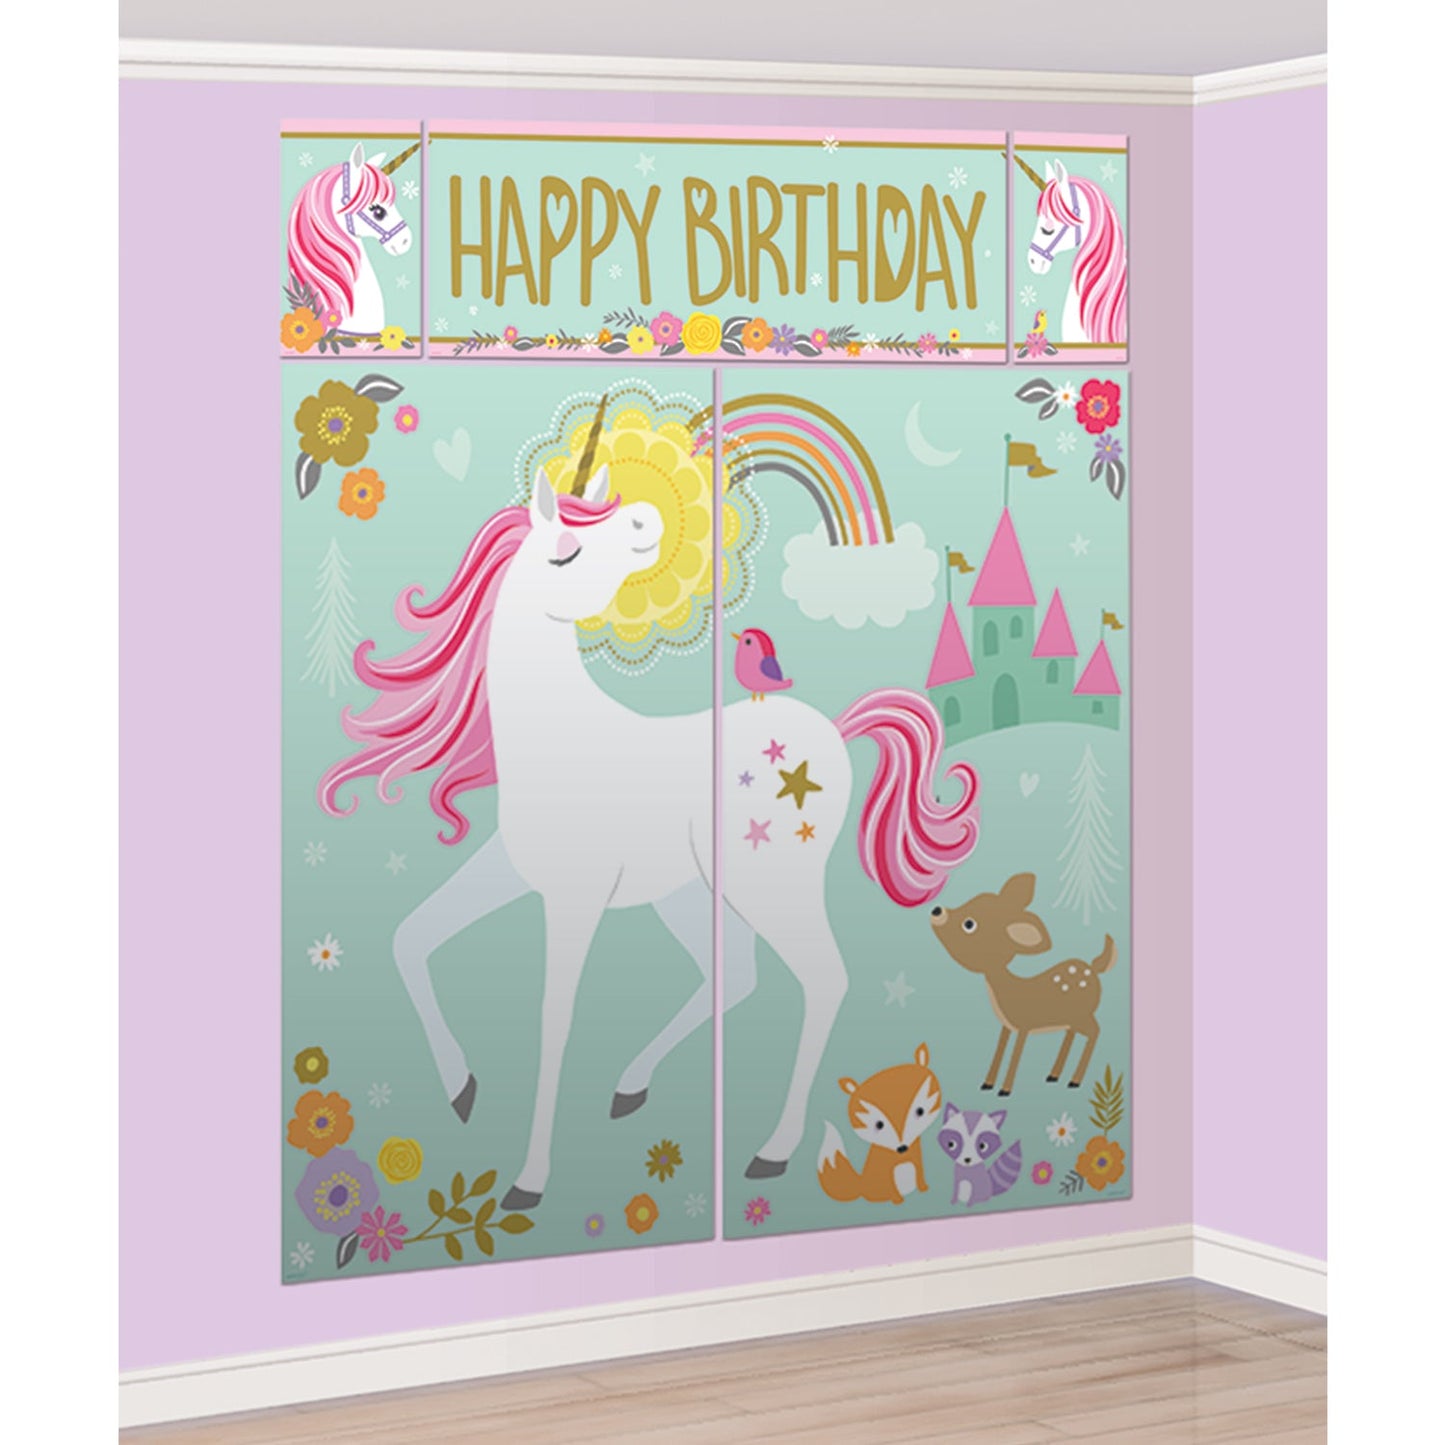 Magical Unicorn Wall Decoration Kit with Photo Props contains: Wall decoration backdrop consisting of 2 pieces 82.5cm x 1.5m, 2 pieces 26cm x 40cm, 1 piece 1.13m x 40cm and 12 Photo Props